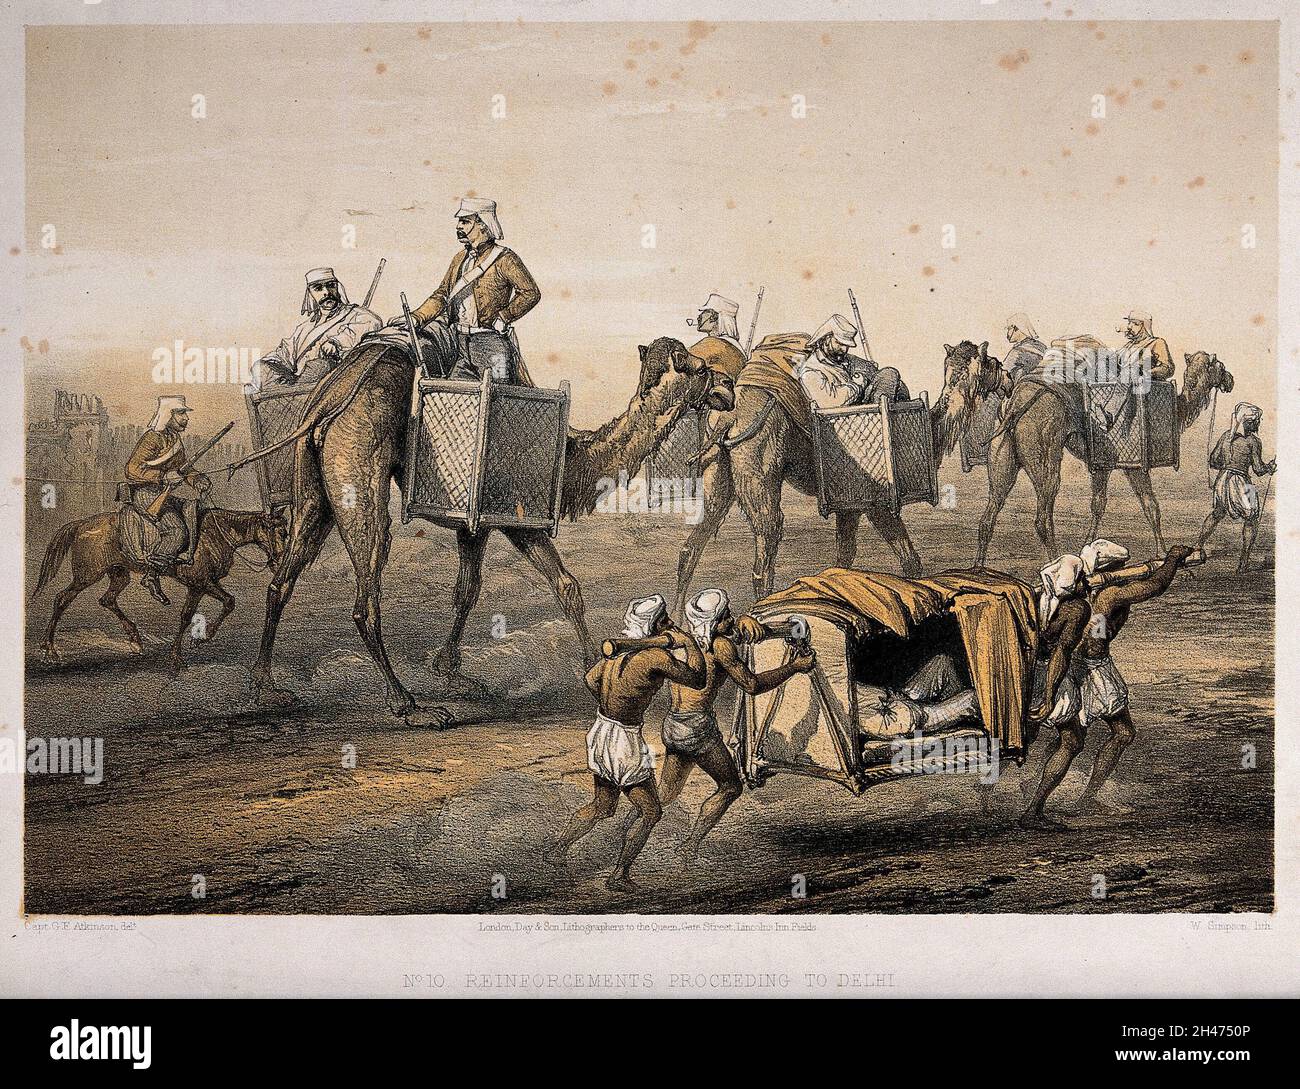 Sepoy Rebellion: British officers travelling in panniers on the backs of camels and borne in a litter by Indian men. Tinted lithograph by W. Simpson, 1859, after G.F. Atkinson. Stock Photo